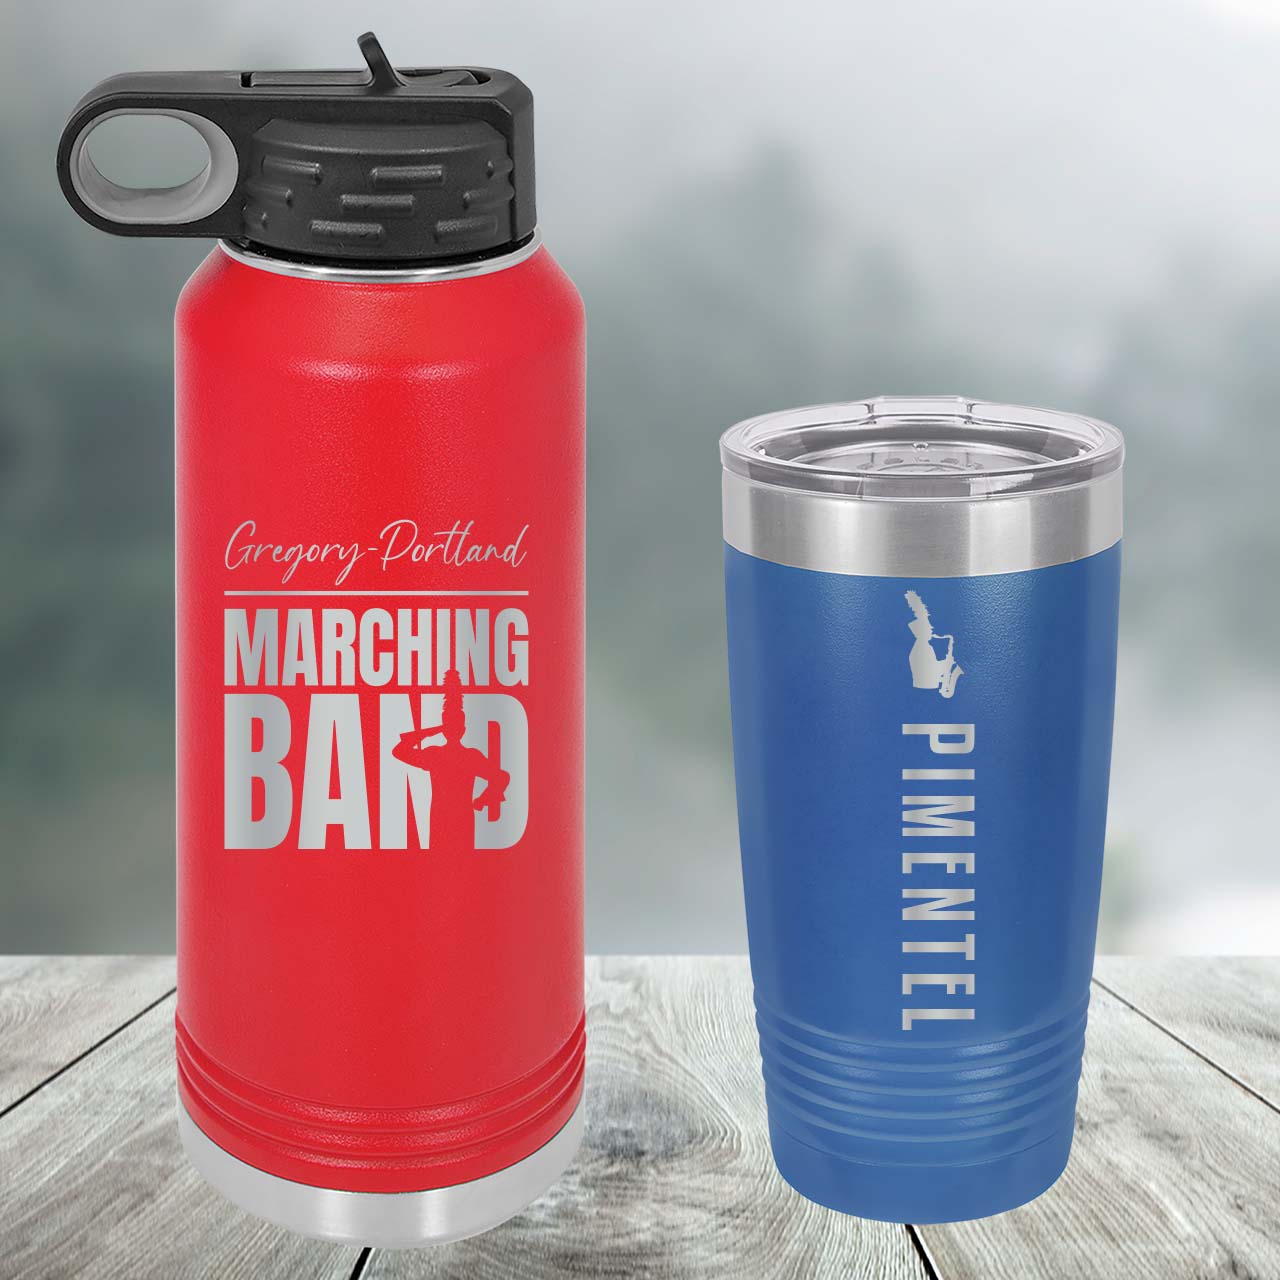 Personalized 12oz Stainless Steel Bottle Maroon